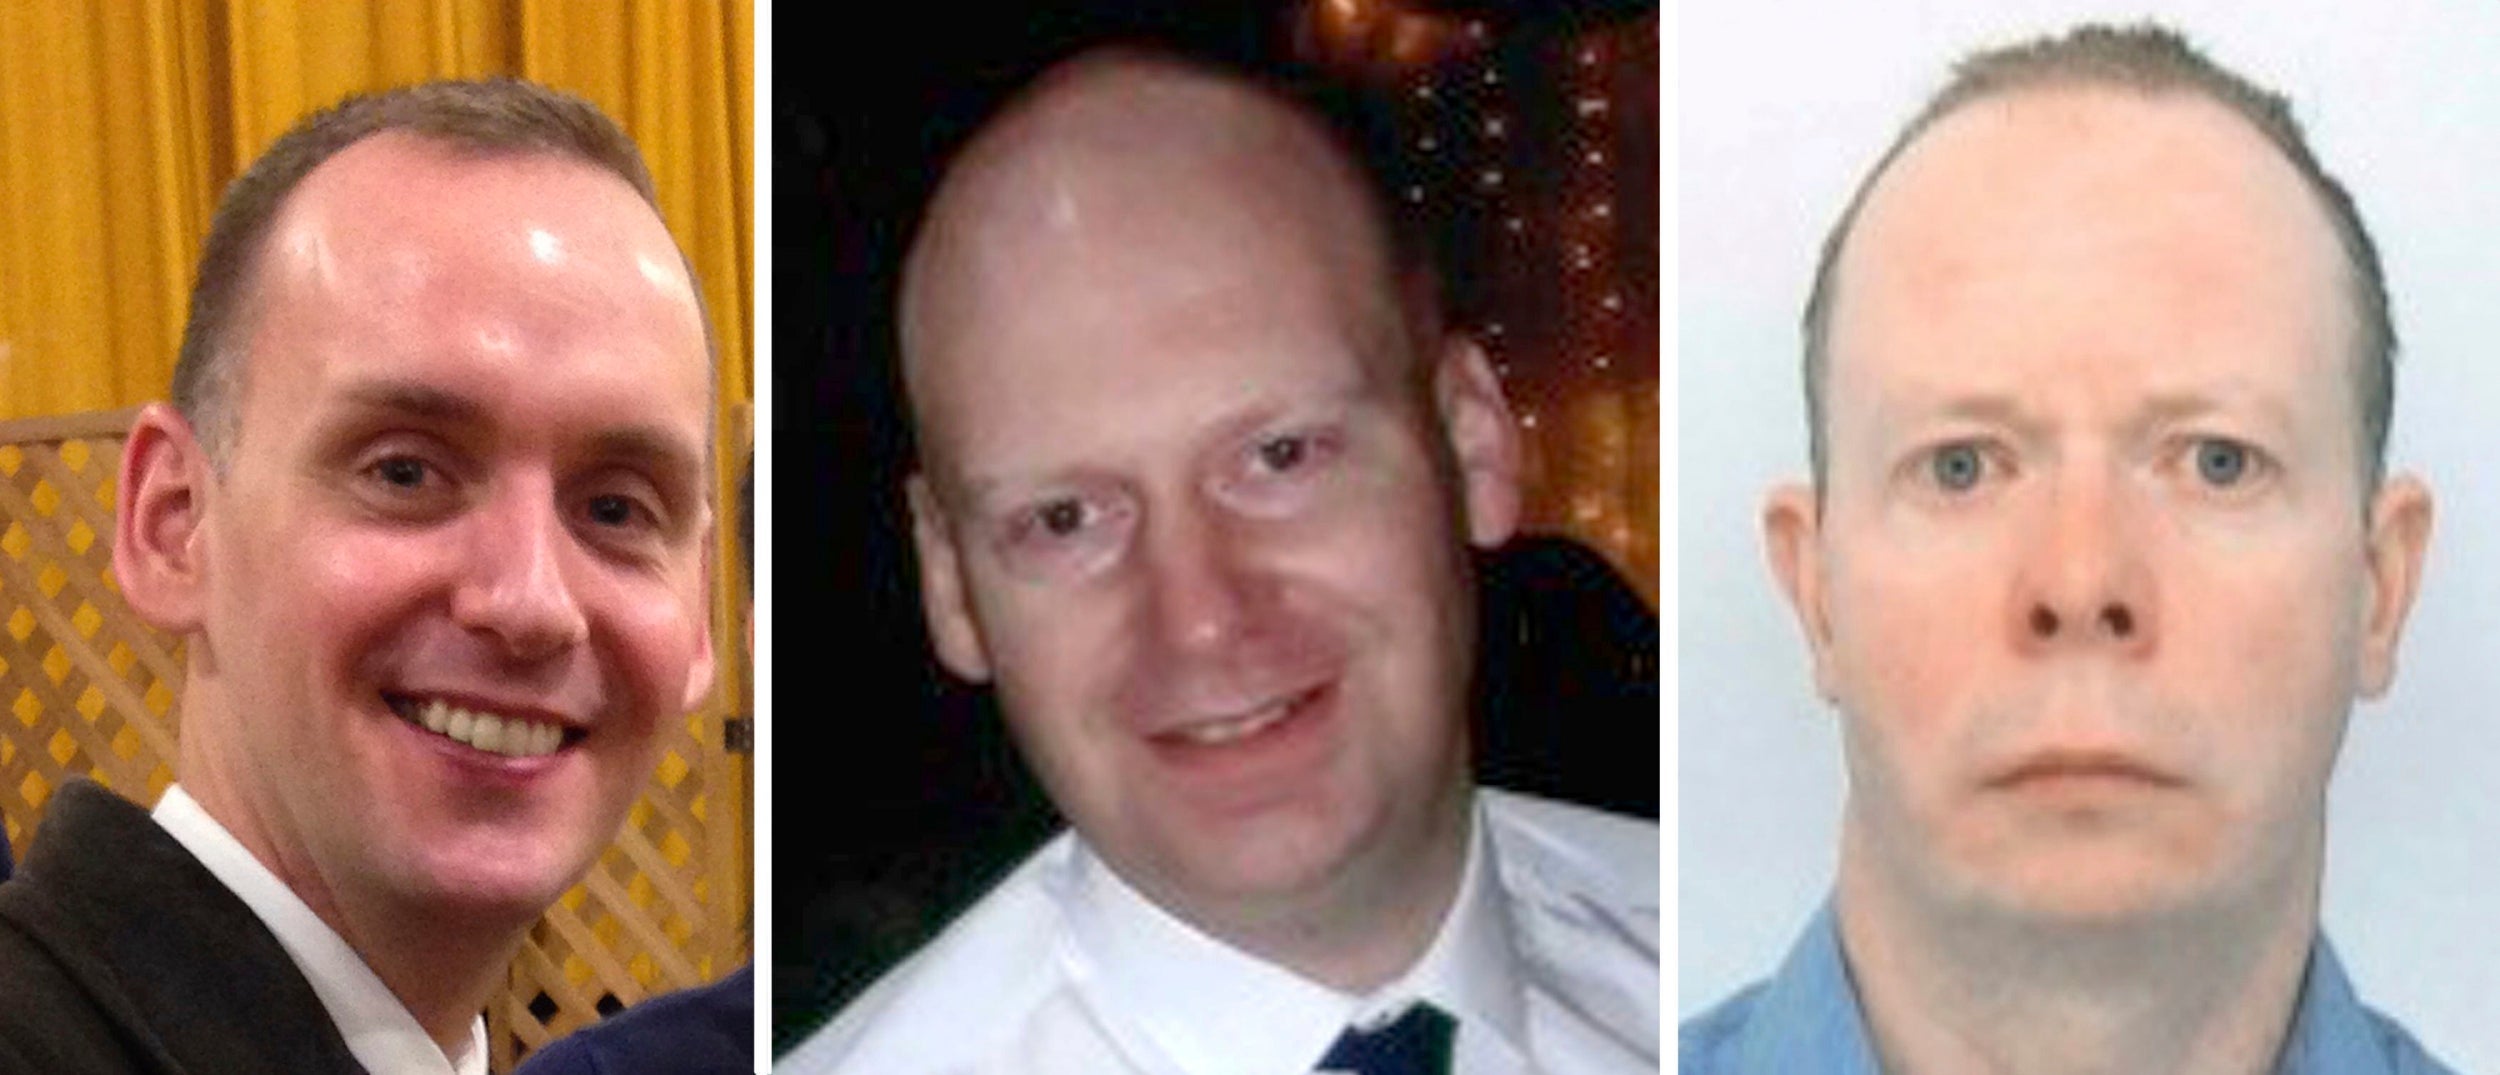 Joe Ritchie-Bennett, James Furlong and David Wails: the three victims who died in the Reading attack